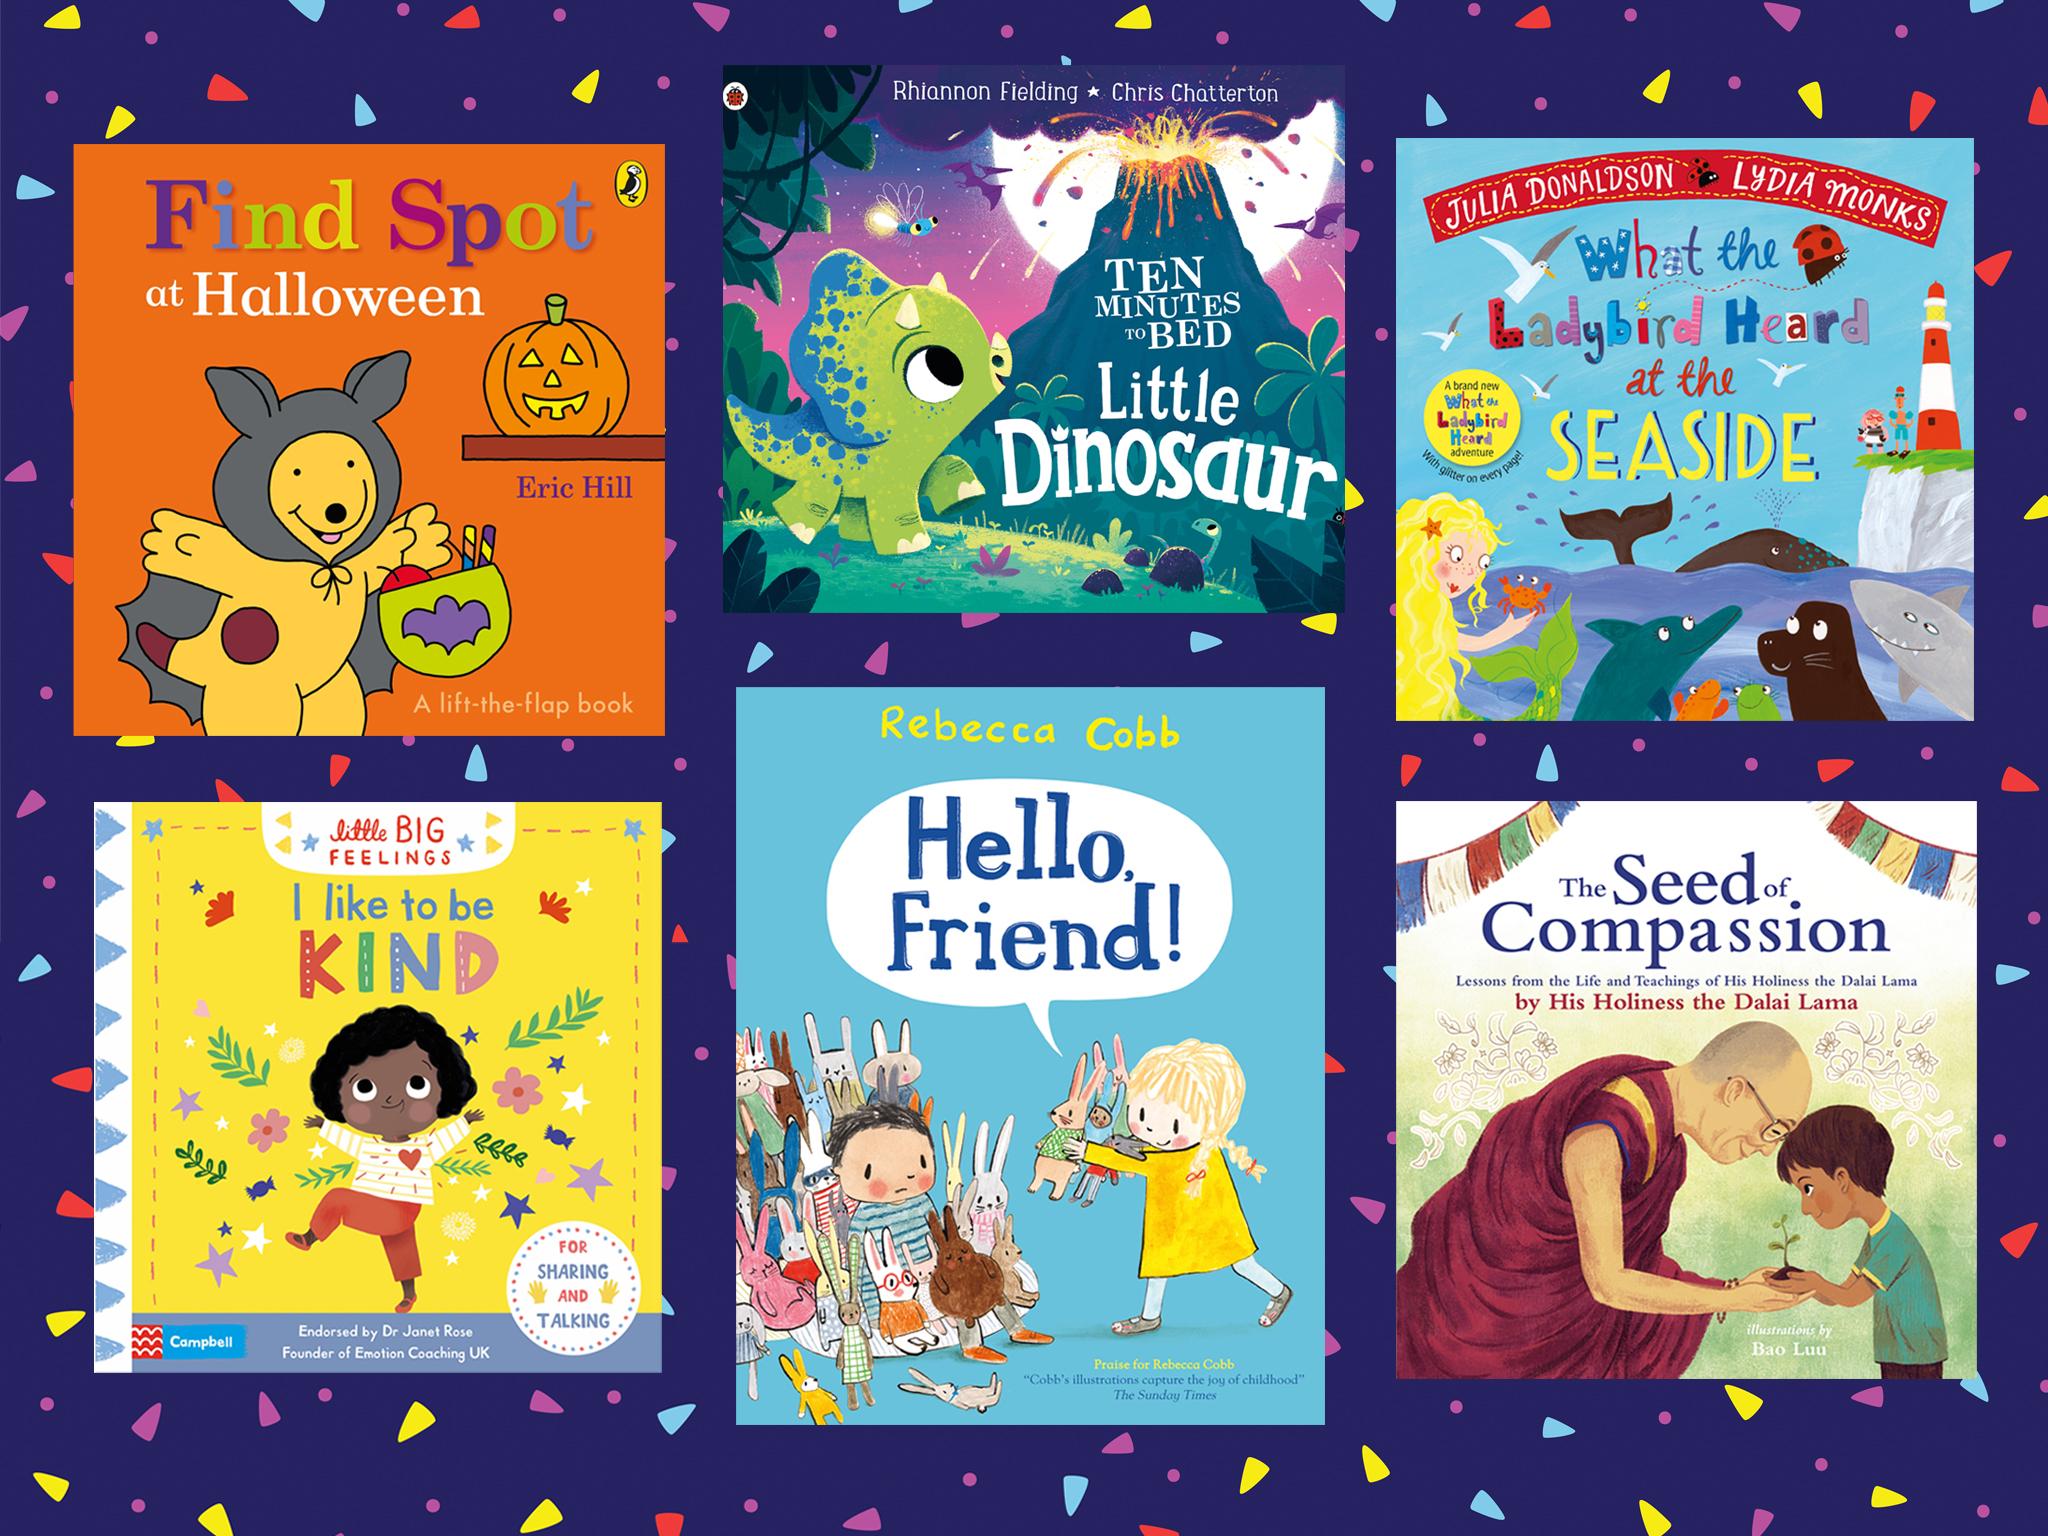 We Love Our Julia Donaldson Book Collection – So Surprising!